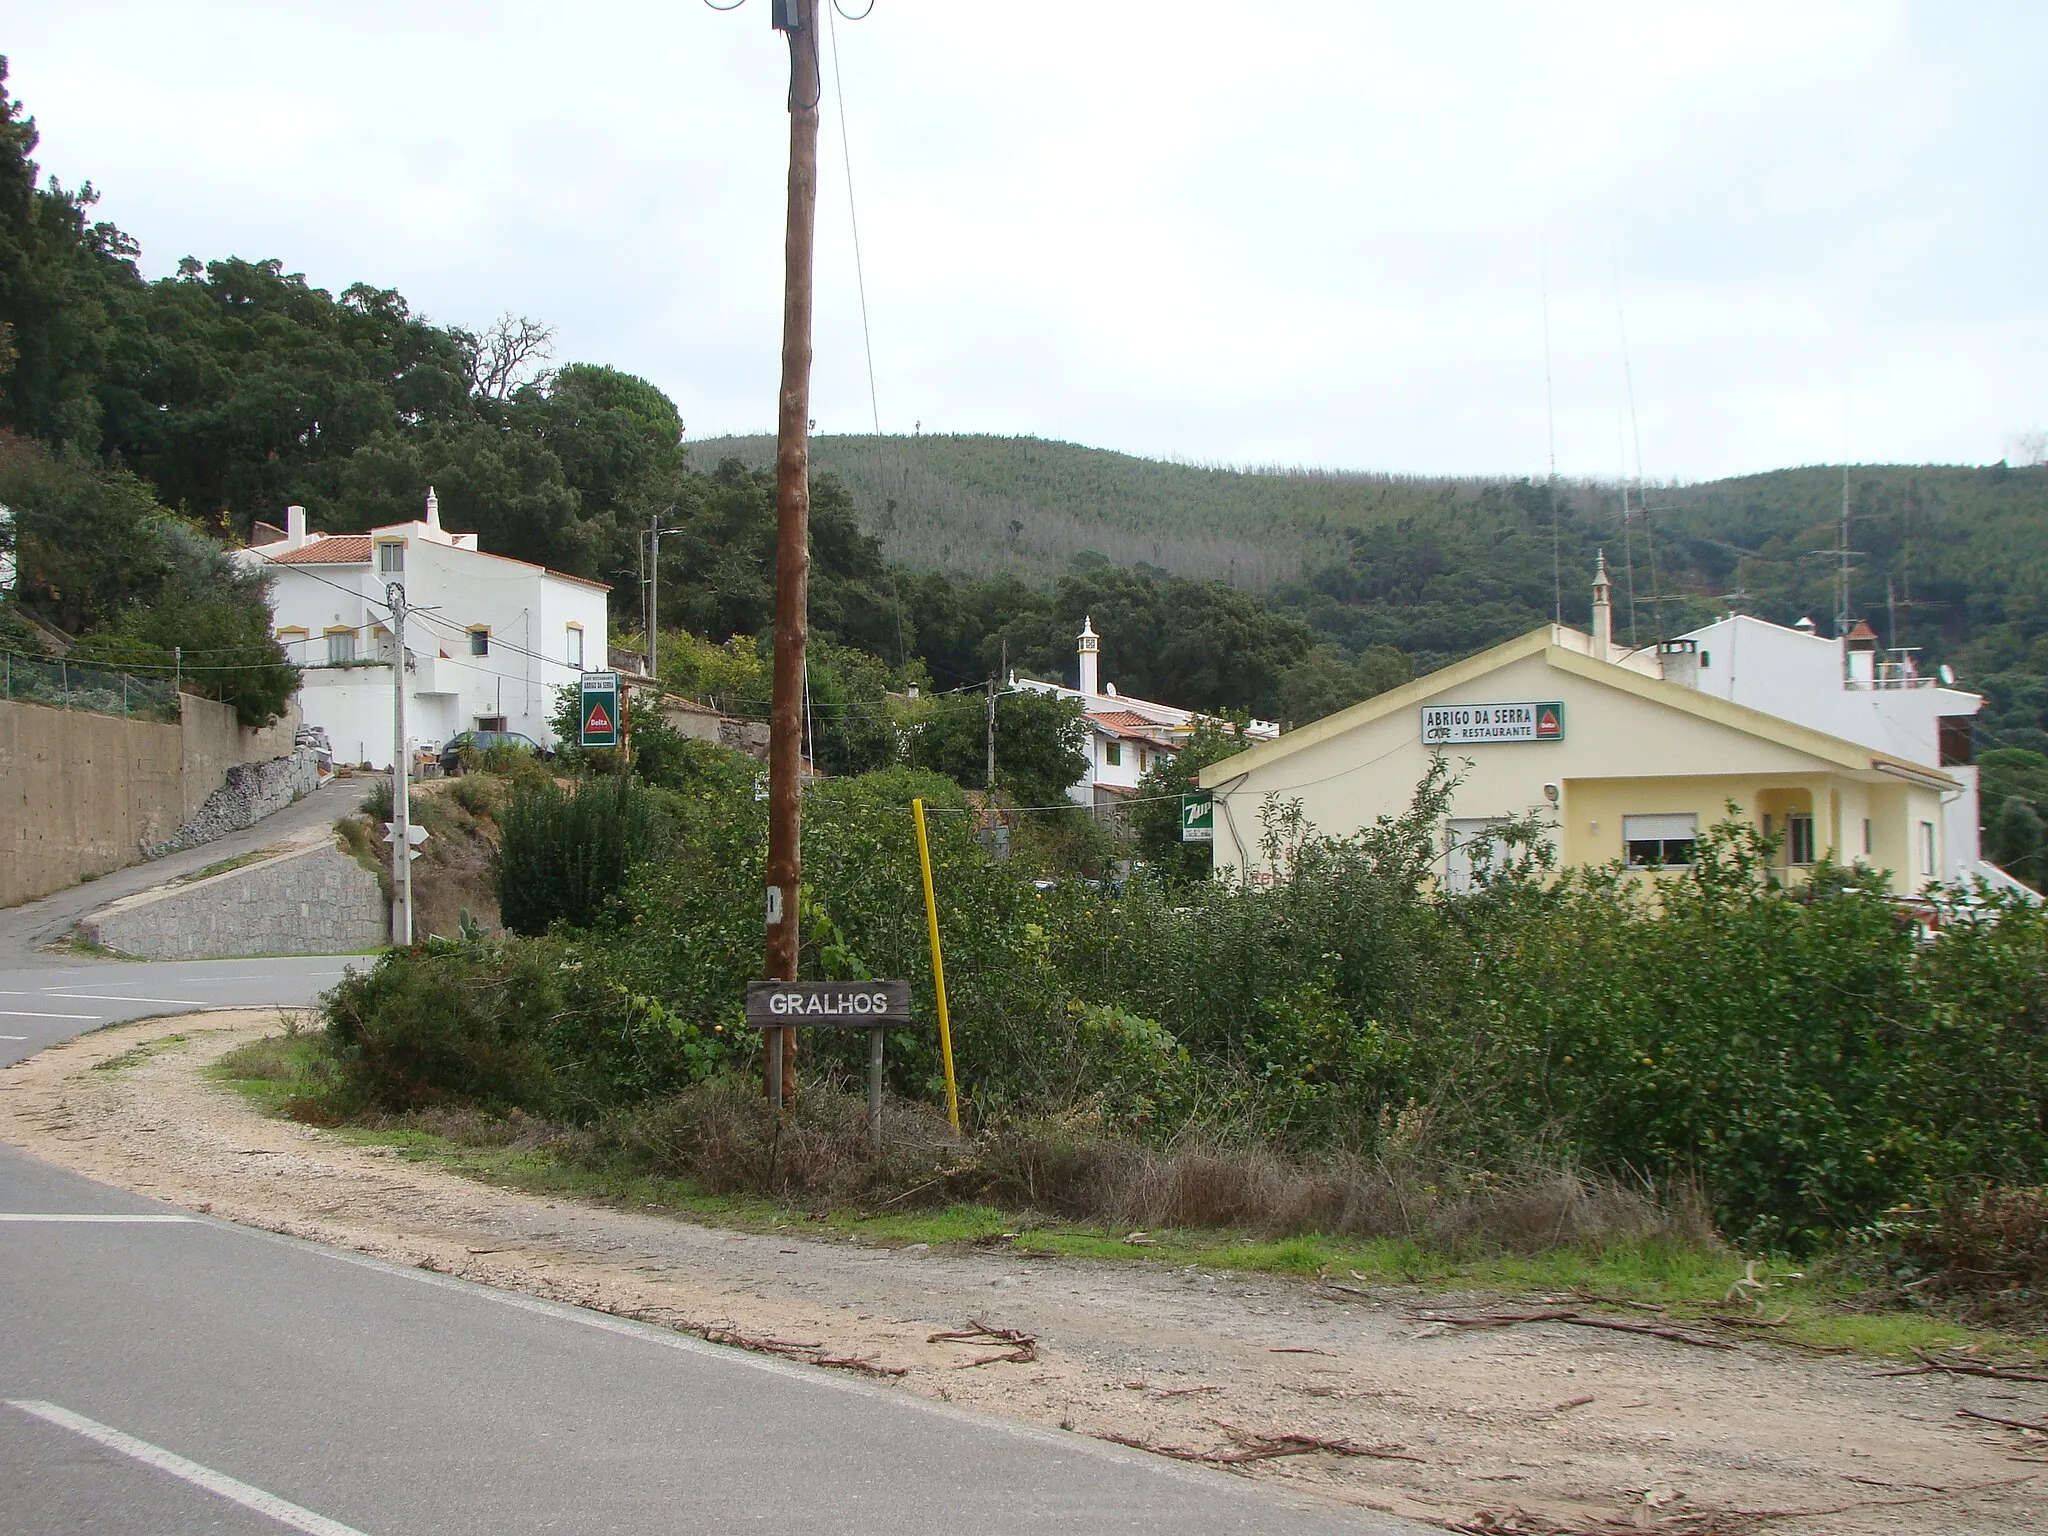 Photo showing: Hamlet of Gralhos, in the Monchique municipality, in Portugal.